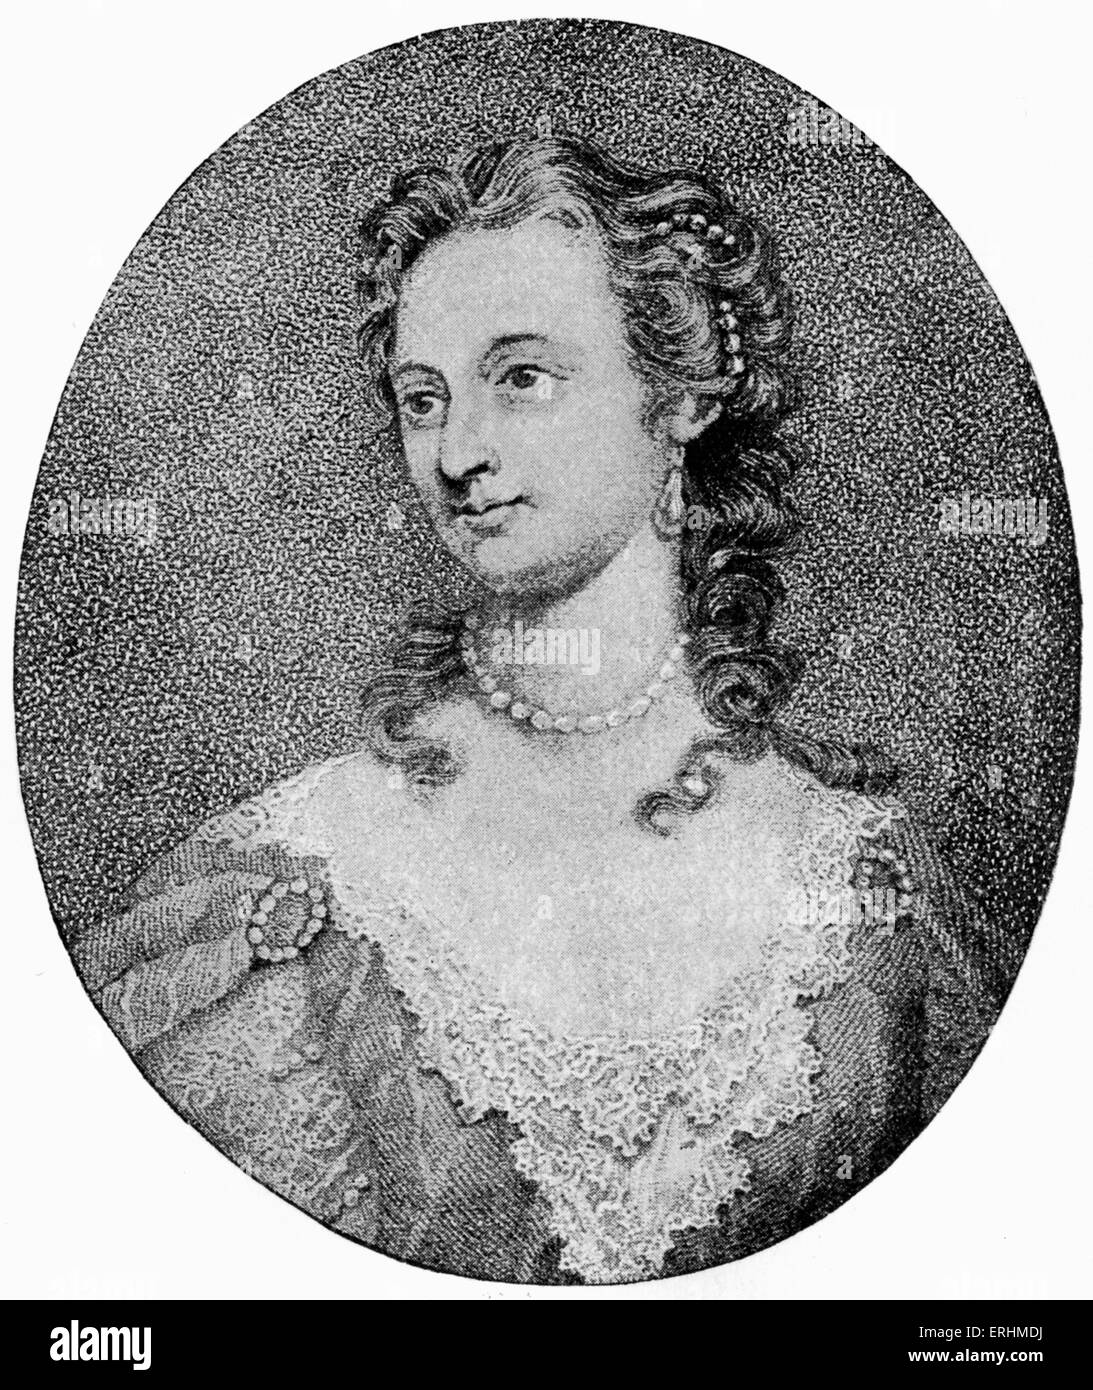 Lady Mary Wortley Montagu - English aristocrat and writer:  26 May 1689 - 21 August 1762.  After the portrait by F Zincke. Stock Photo